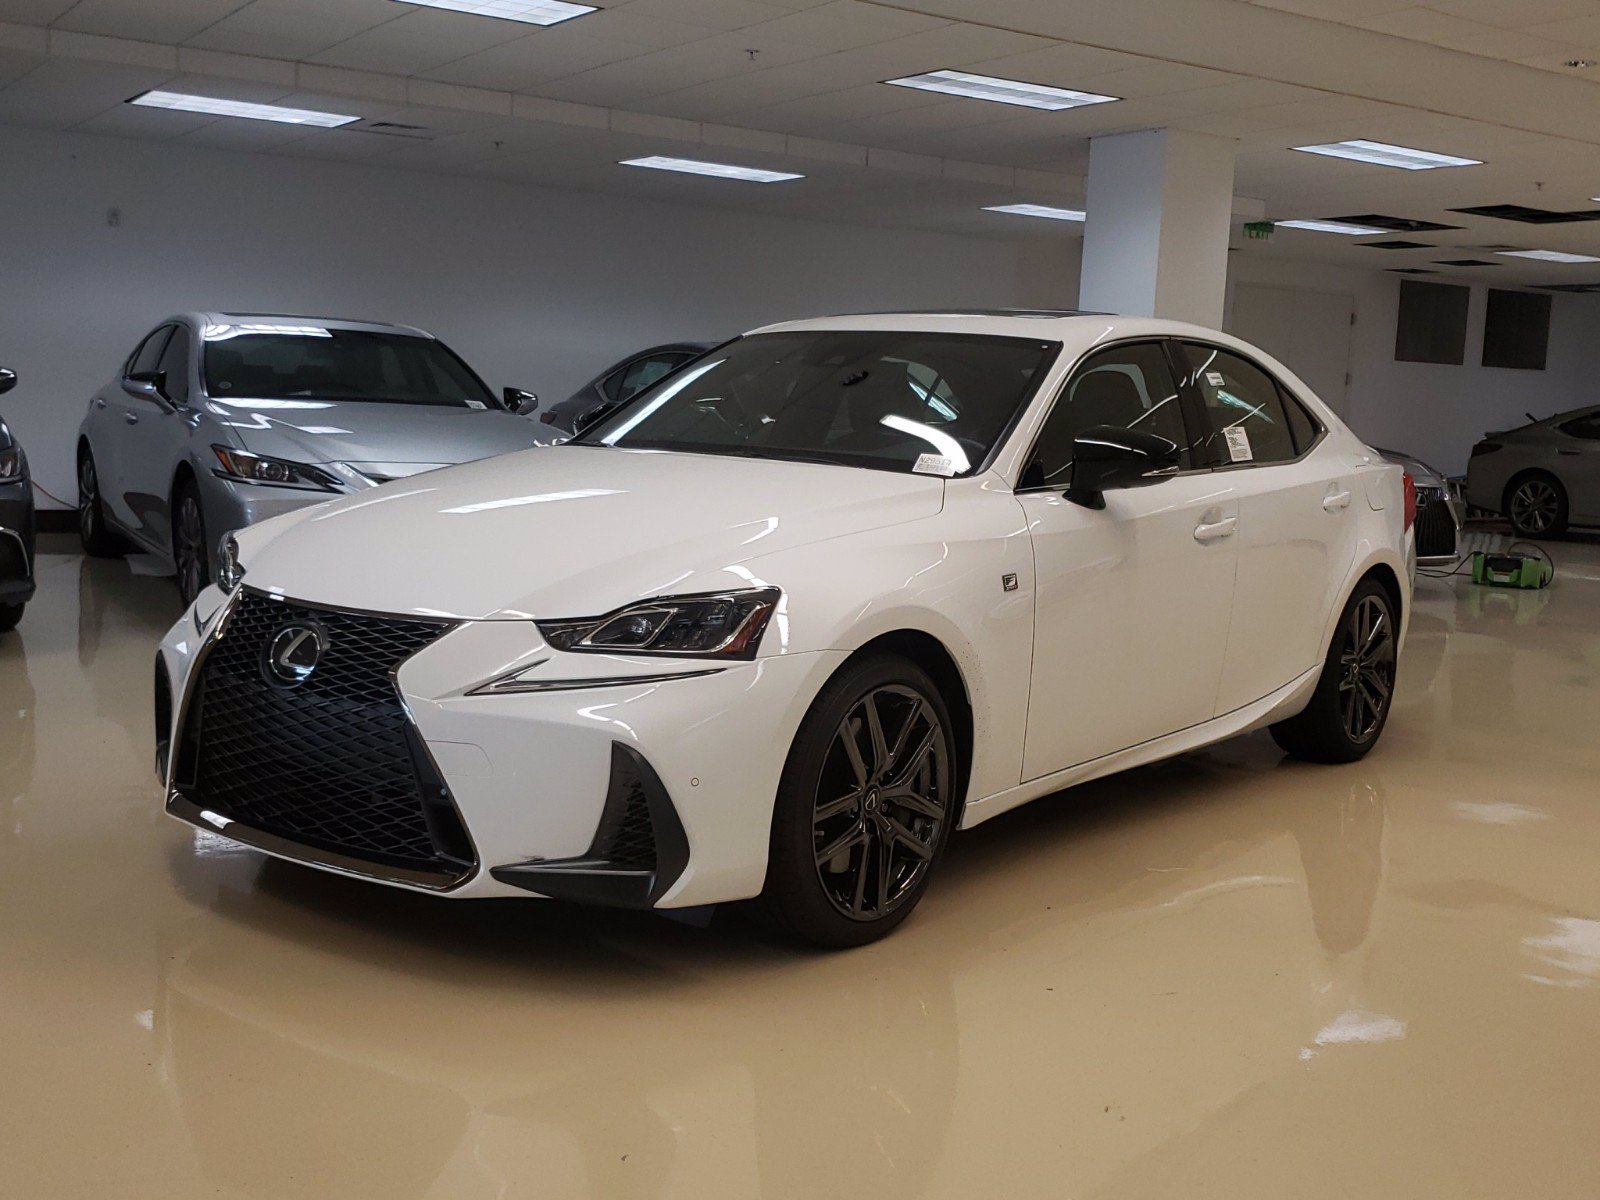 New 2020 Lexus IS 300 IS 300 F SPORT 4dr Car in Miami 